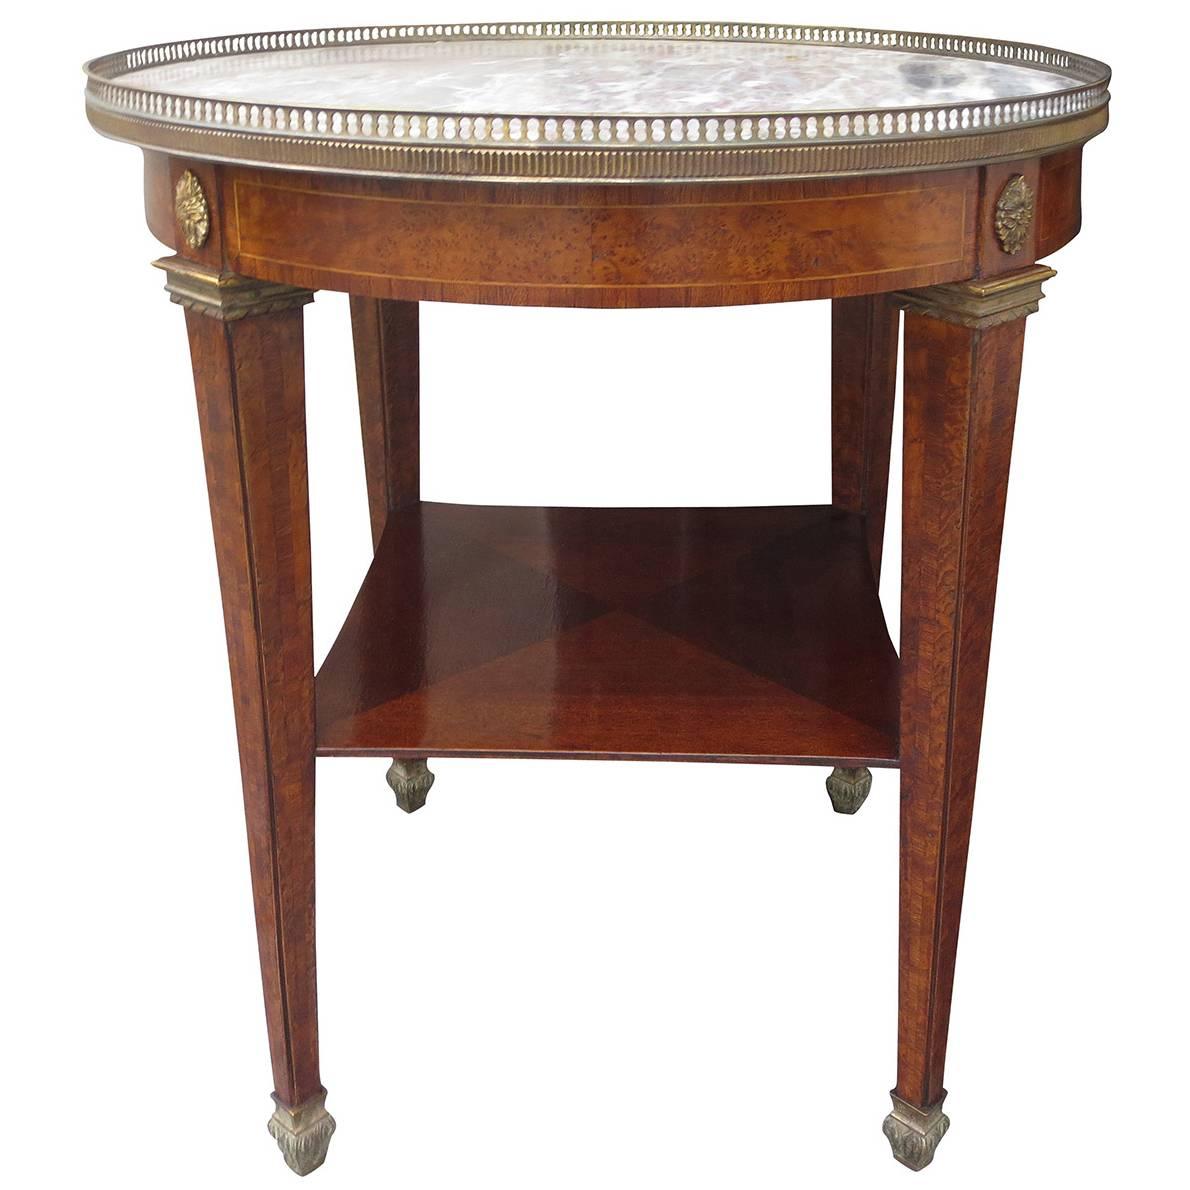 20thC Bronze Mounted Parquetry Burled Wood Round Table c.1900